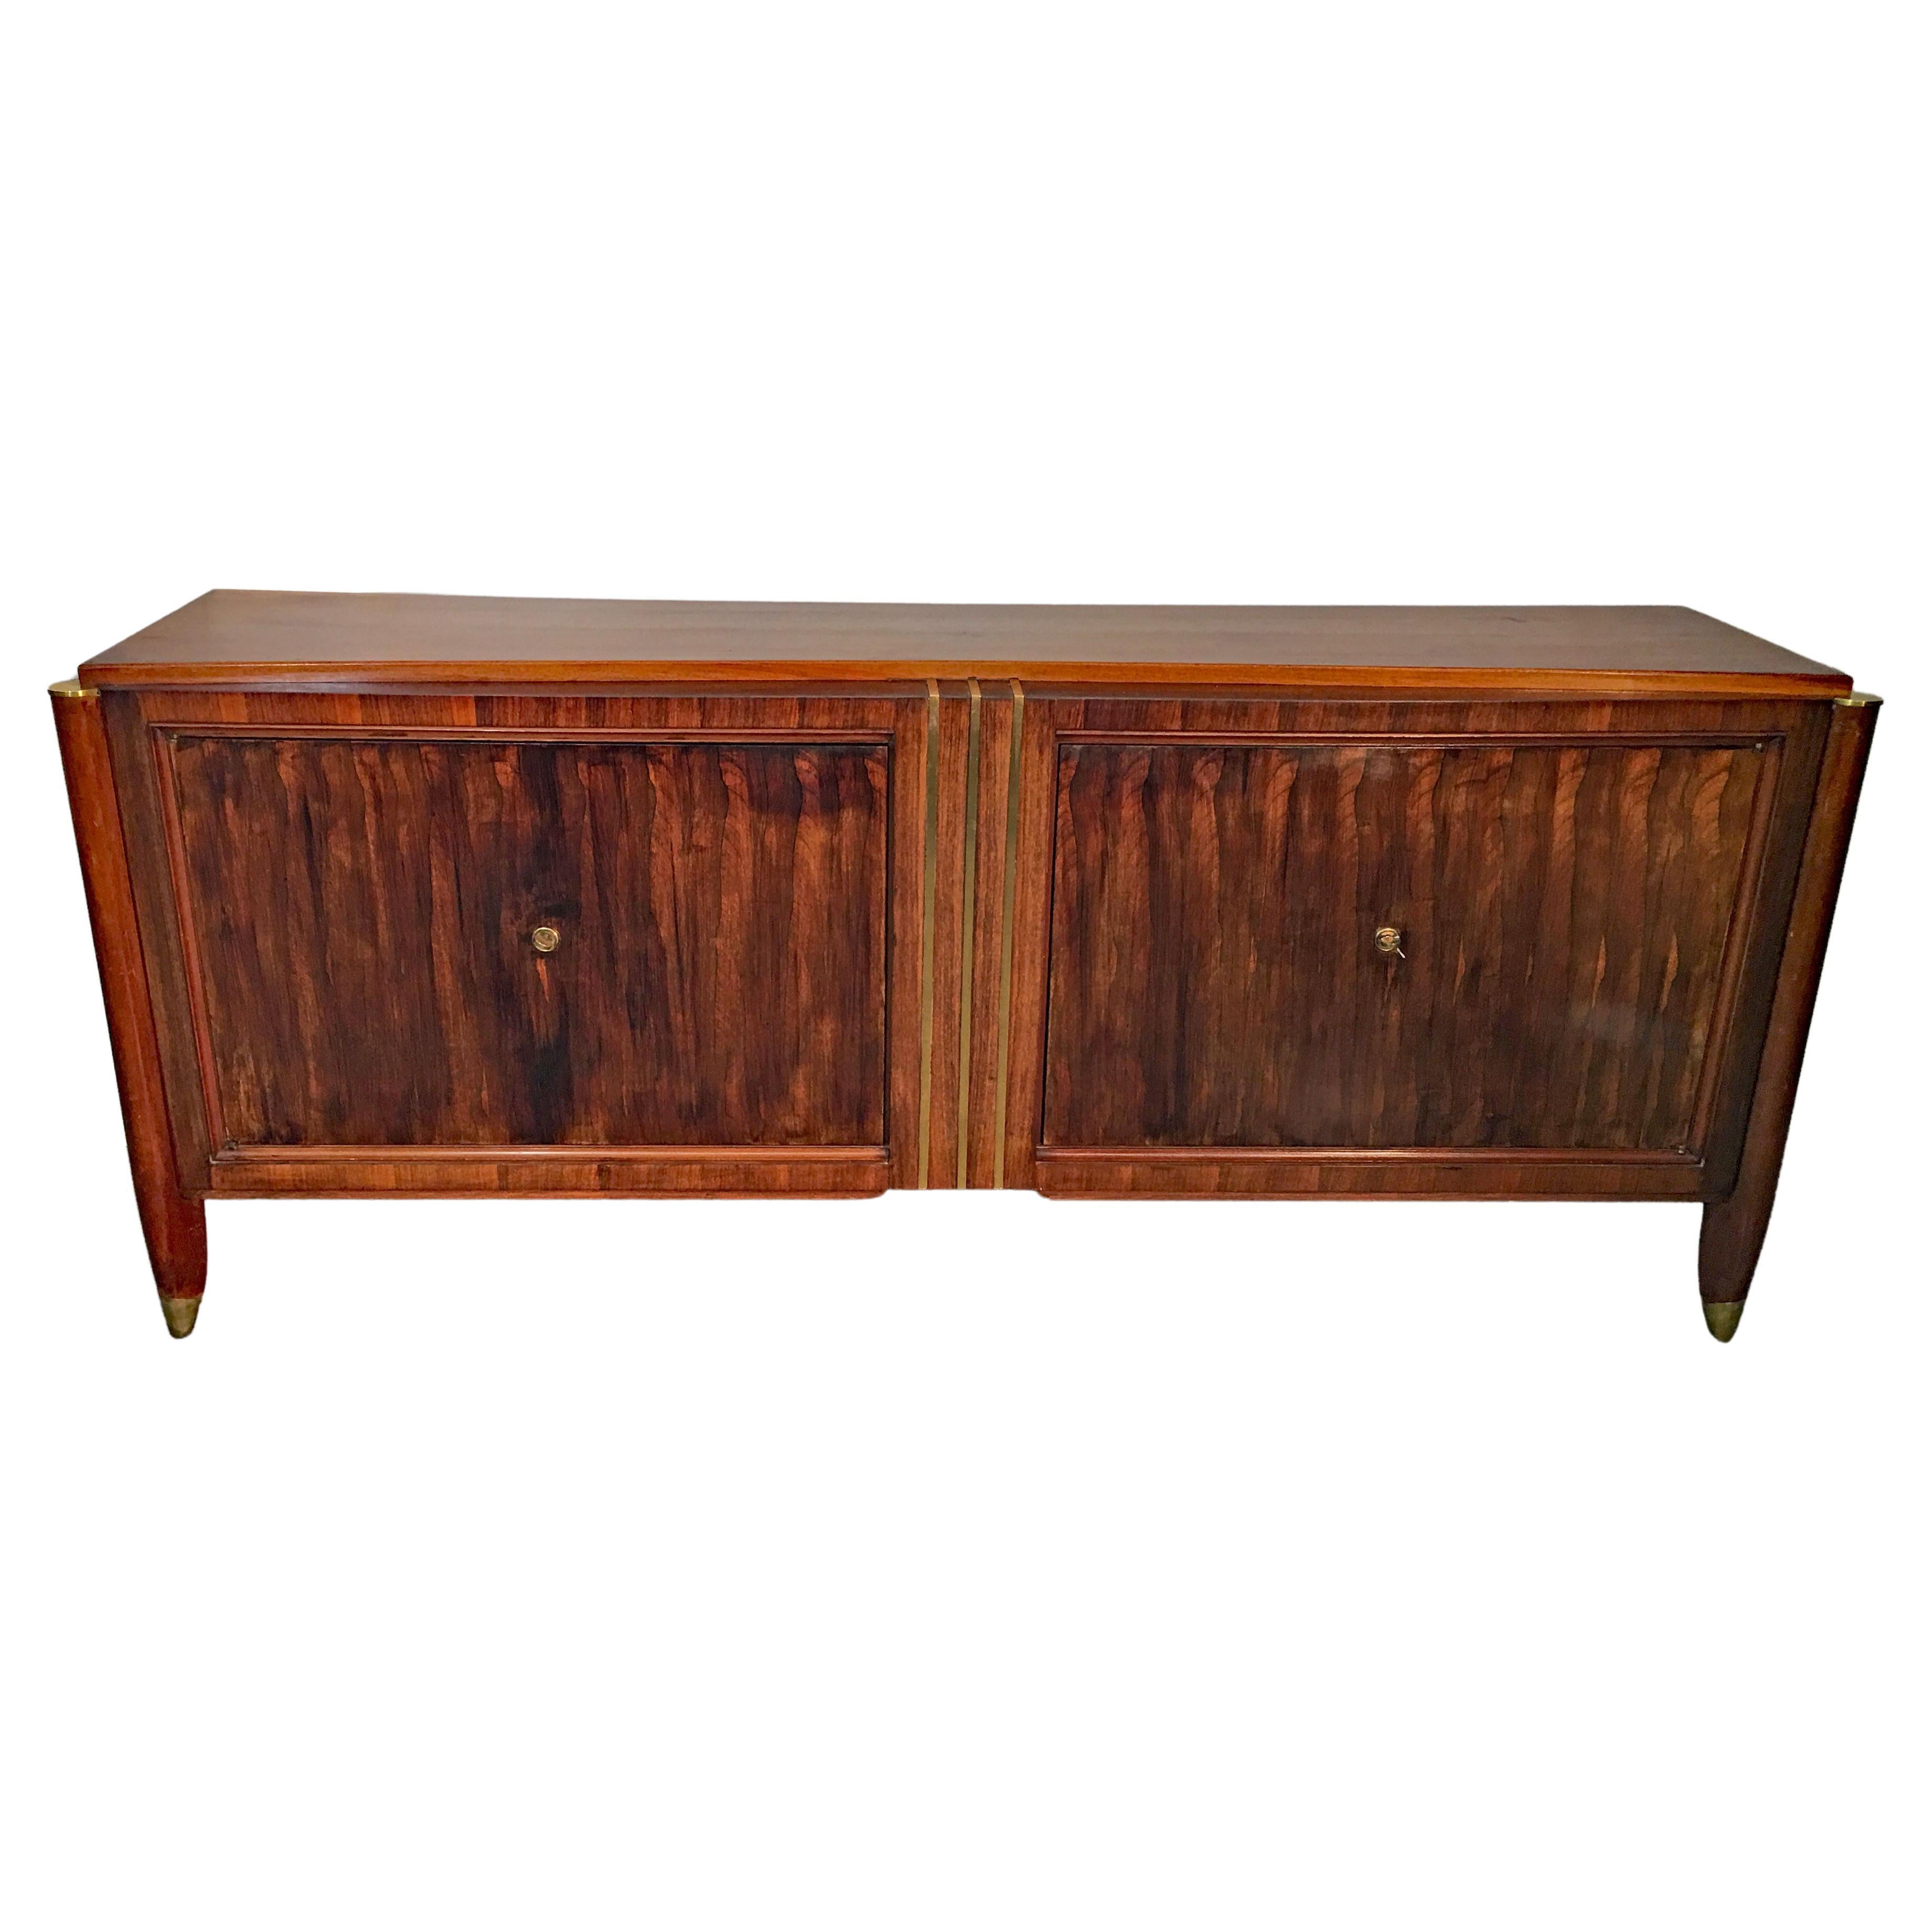 Art Deco Sideboard in Walnut and Bronze in the Style of Dominique, circa 1930